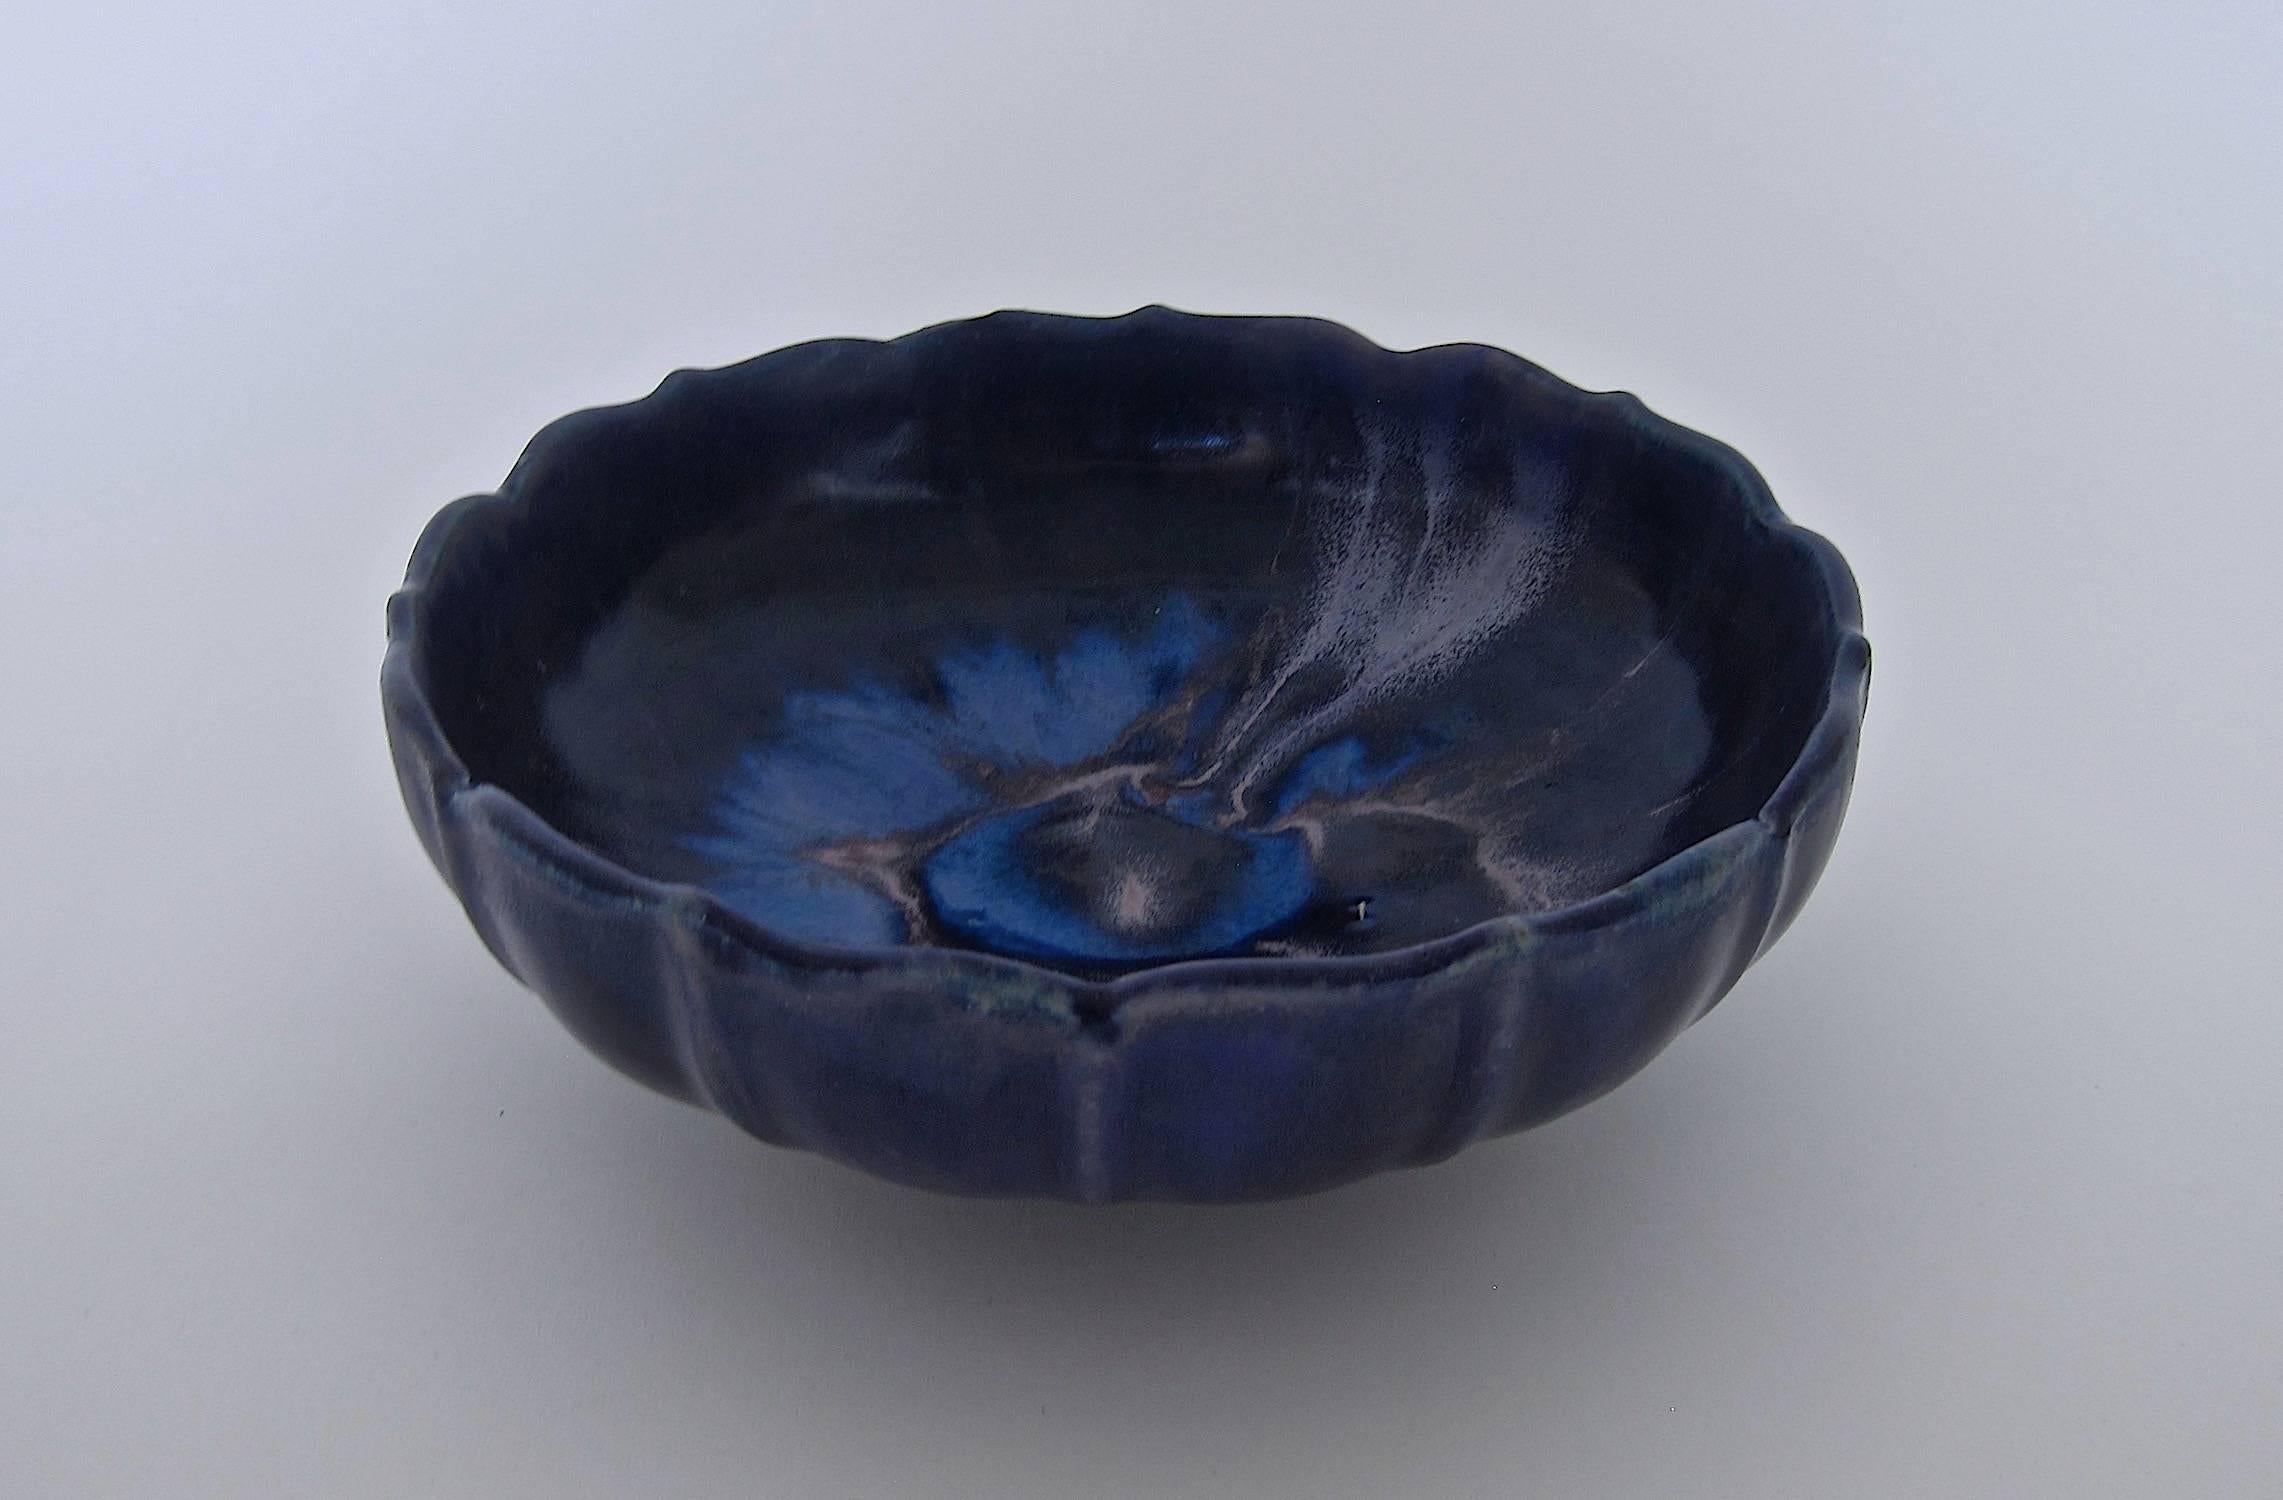 A vintage lotus form American art pottery footed bowl from Fulper Pottery of Flemington, New Jersey. The fluted bowl, sometimes called a fruit bowl, is decorated with a rich purple/blue/indigo glaze, accented with shades of lighter blue and hints of